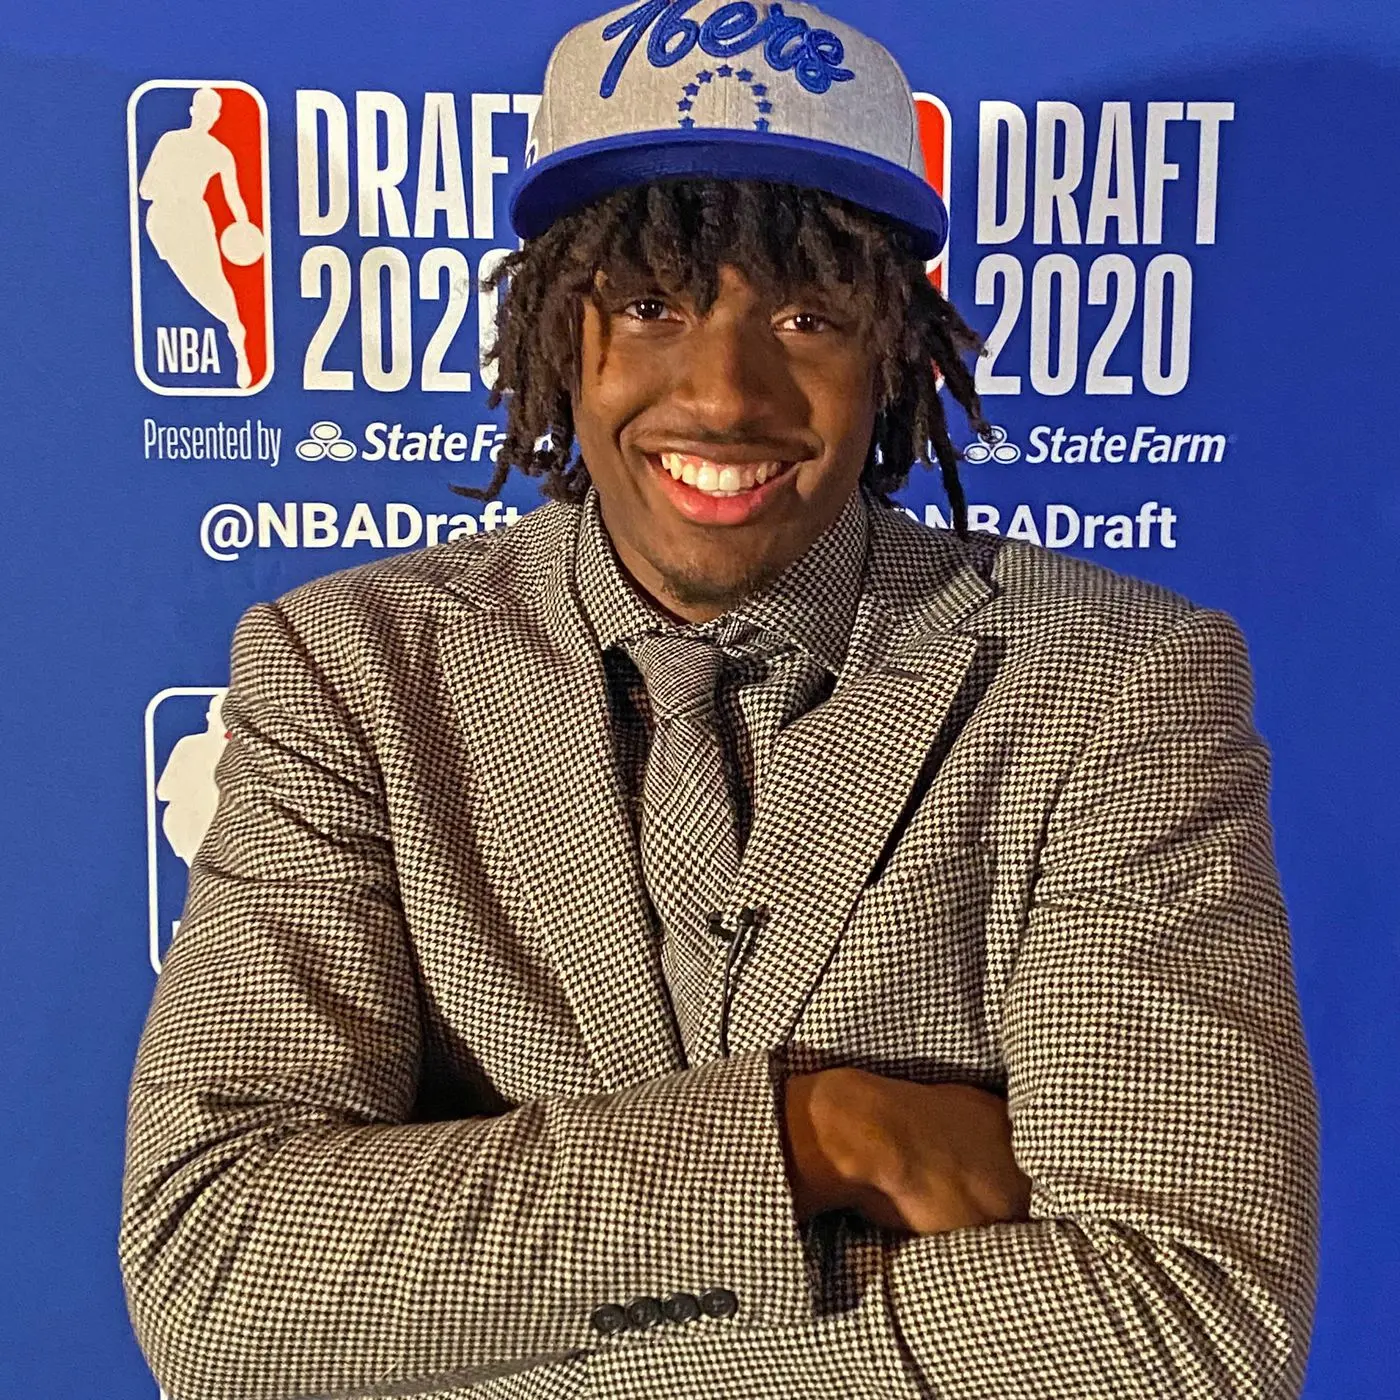 Drafted by the Philadelphia 76er in the 2020 NBA Draft